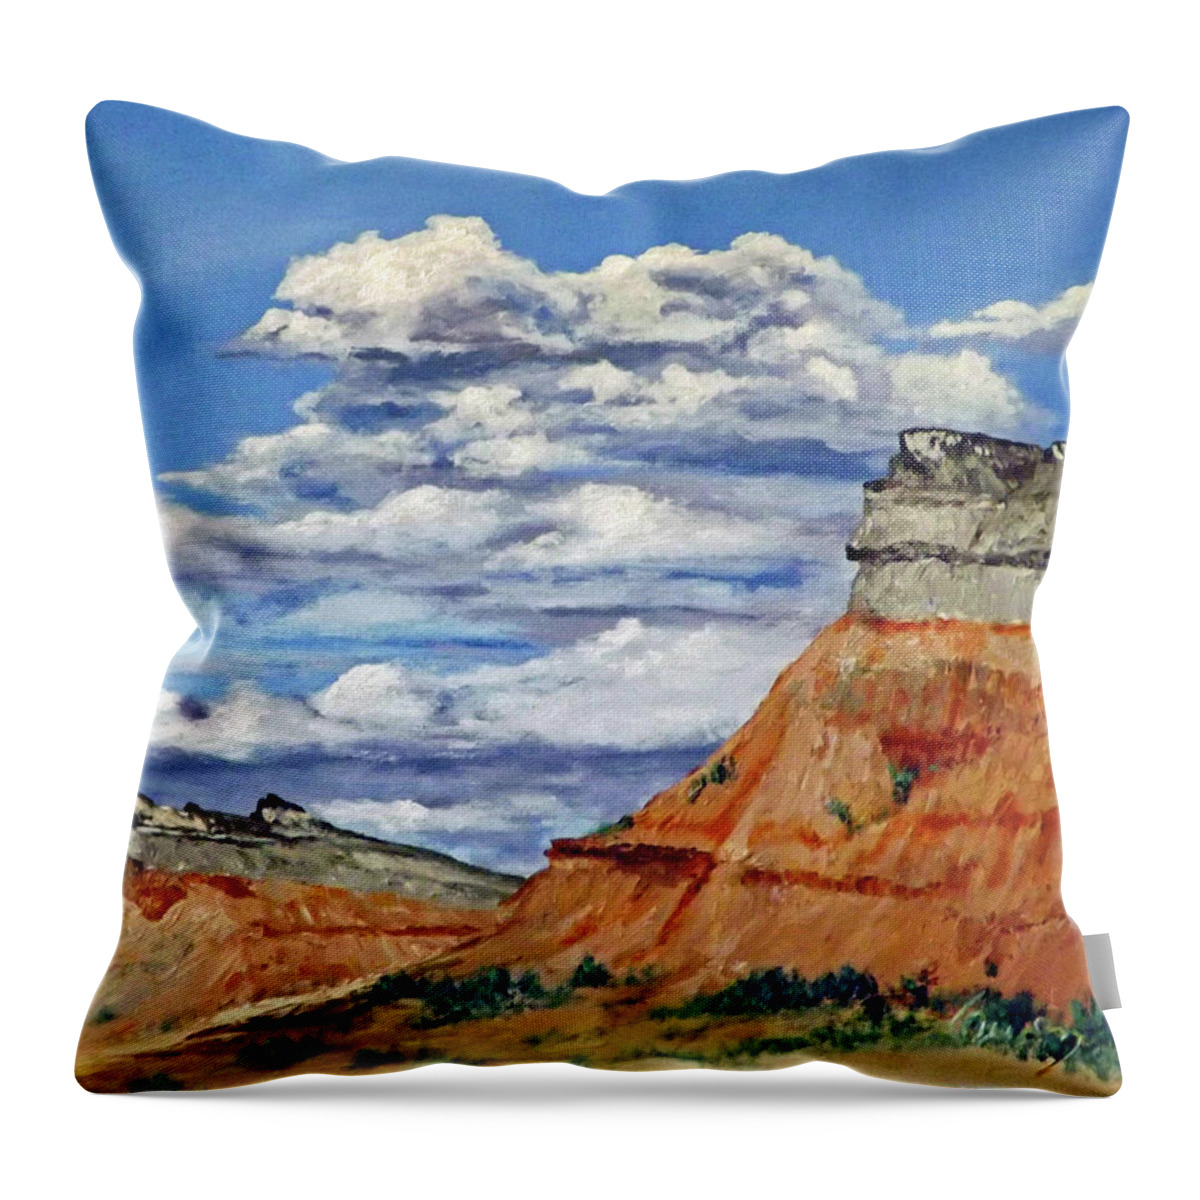 Landscape Throw Pillow featuring the painting Mile Marker 34 / 1 of 6 by Carl Owen